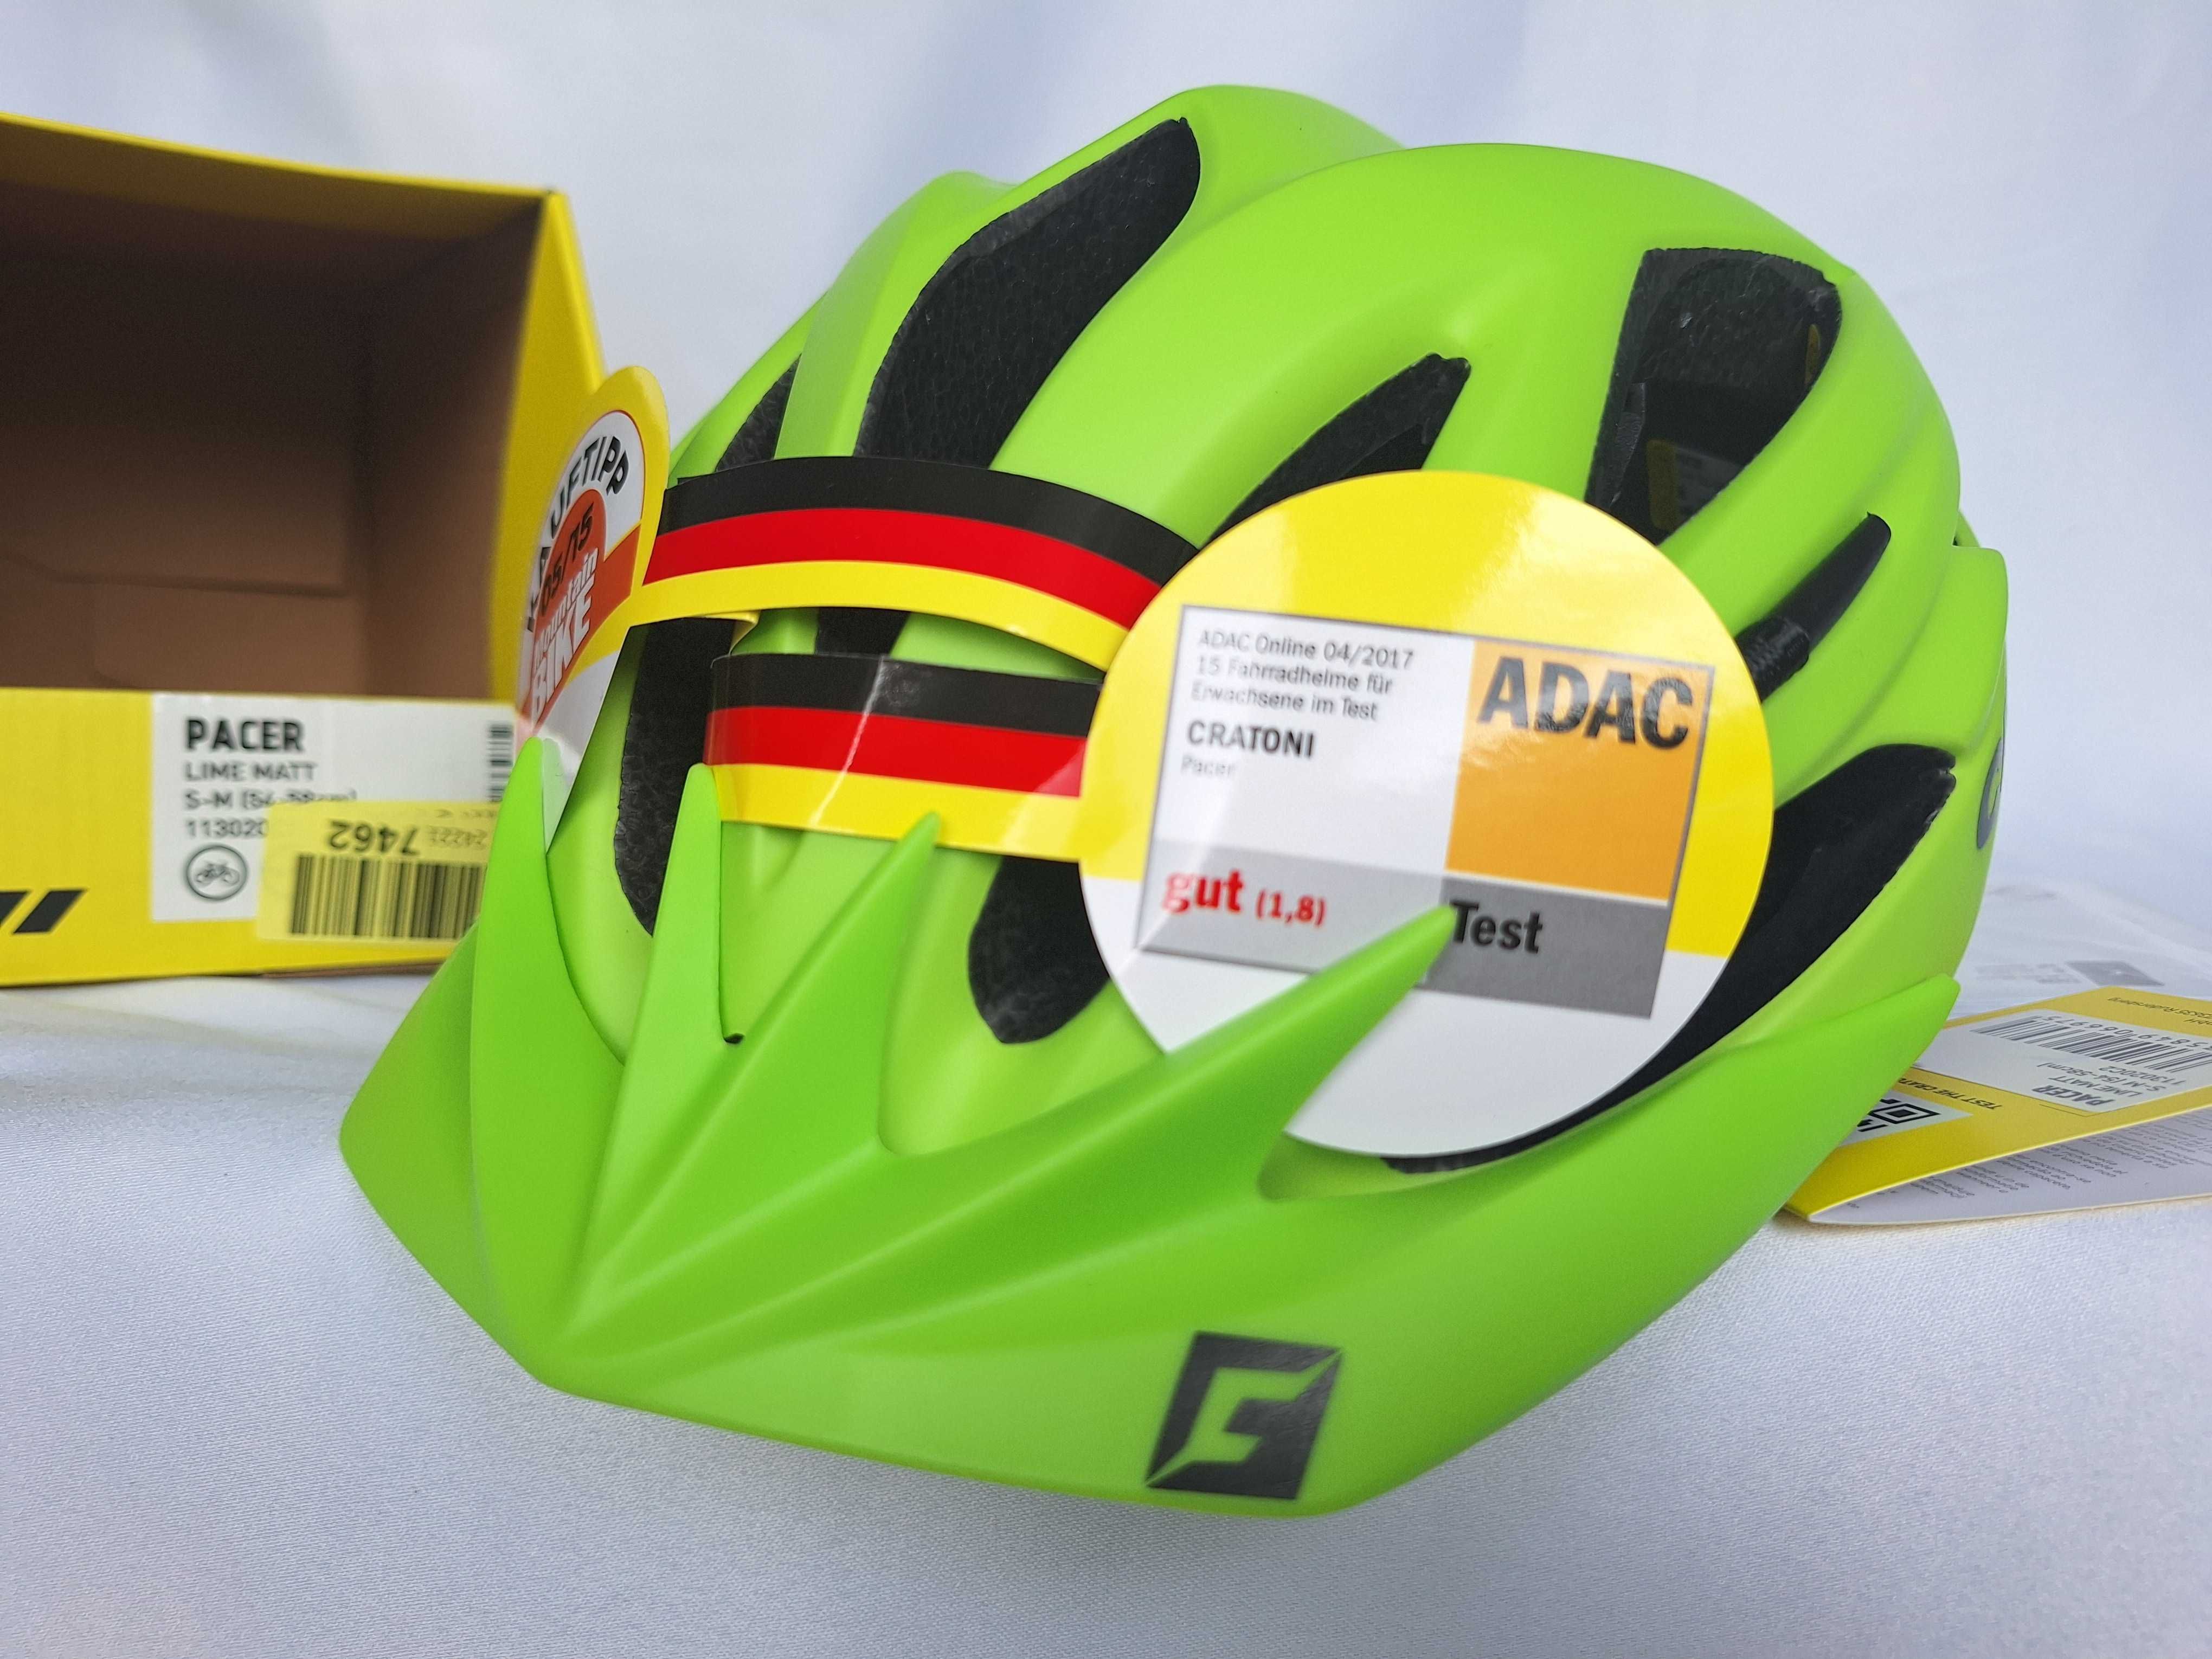 Kask rowerowy Cratoni Pacer Lime Matt S/M 54-58cm